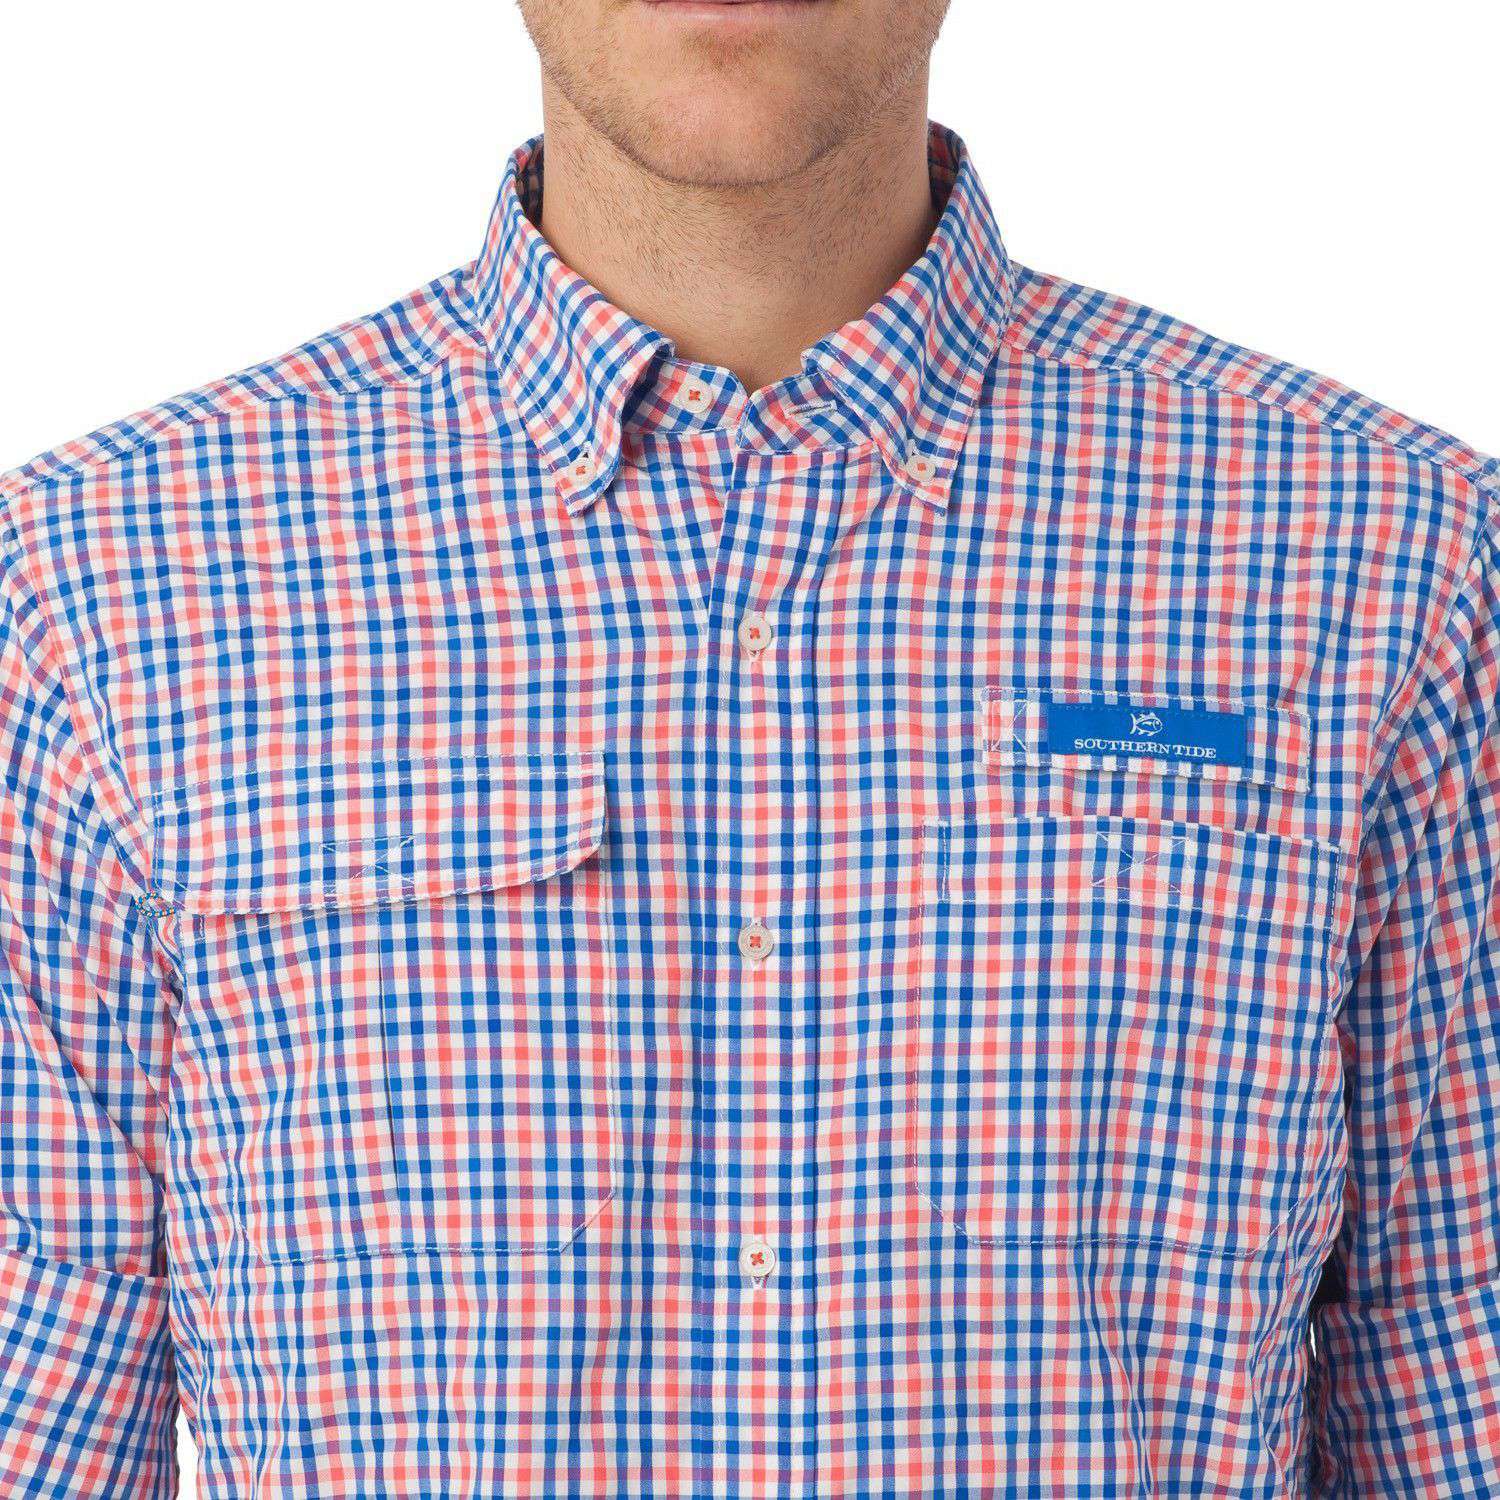 Tarpon Plaid Fishing Shirt in Hot Coral by Southern Tide